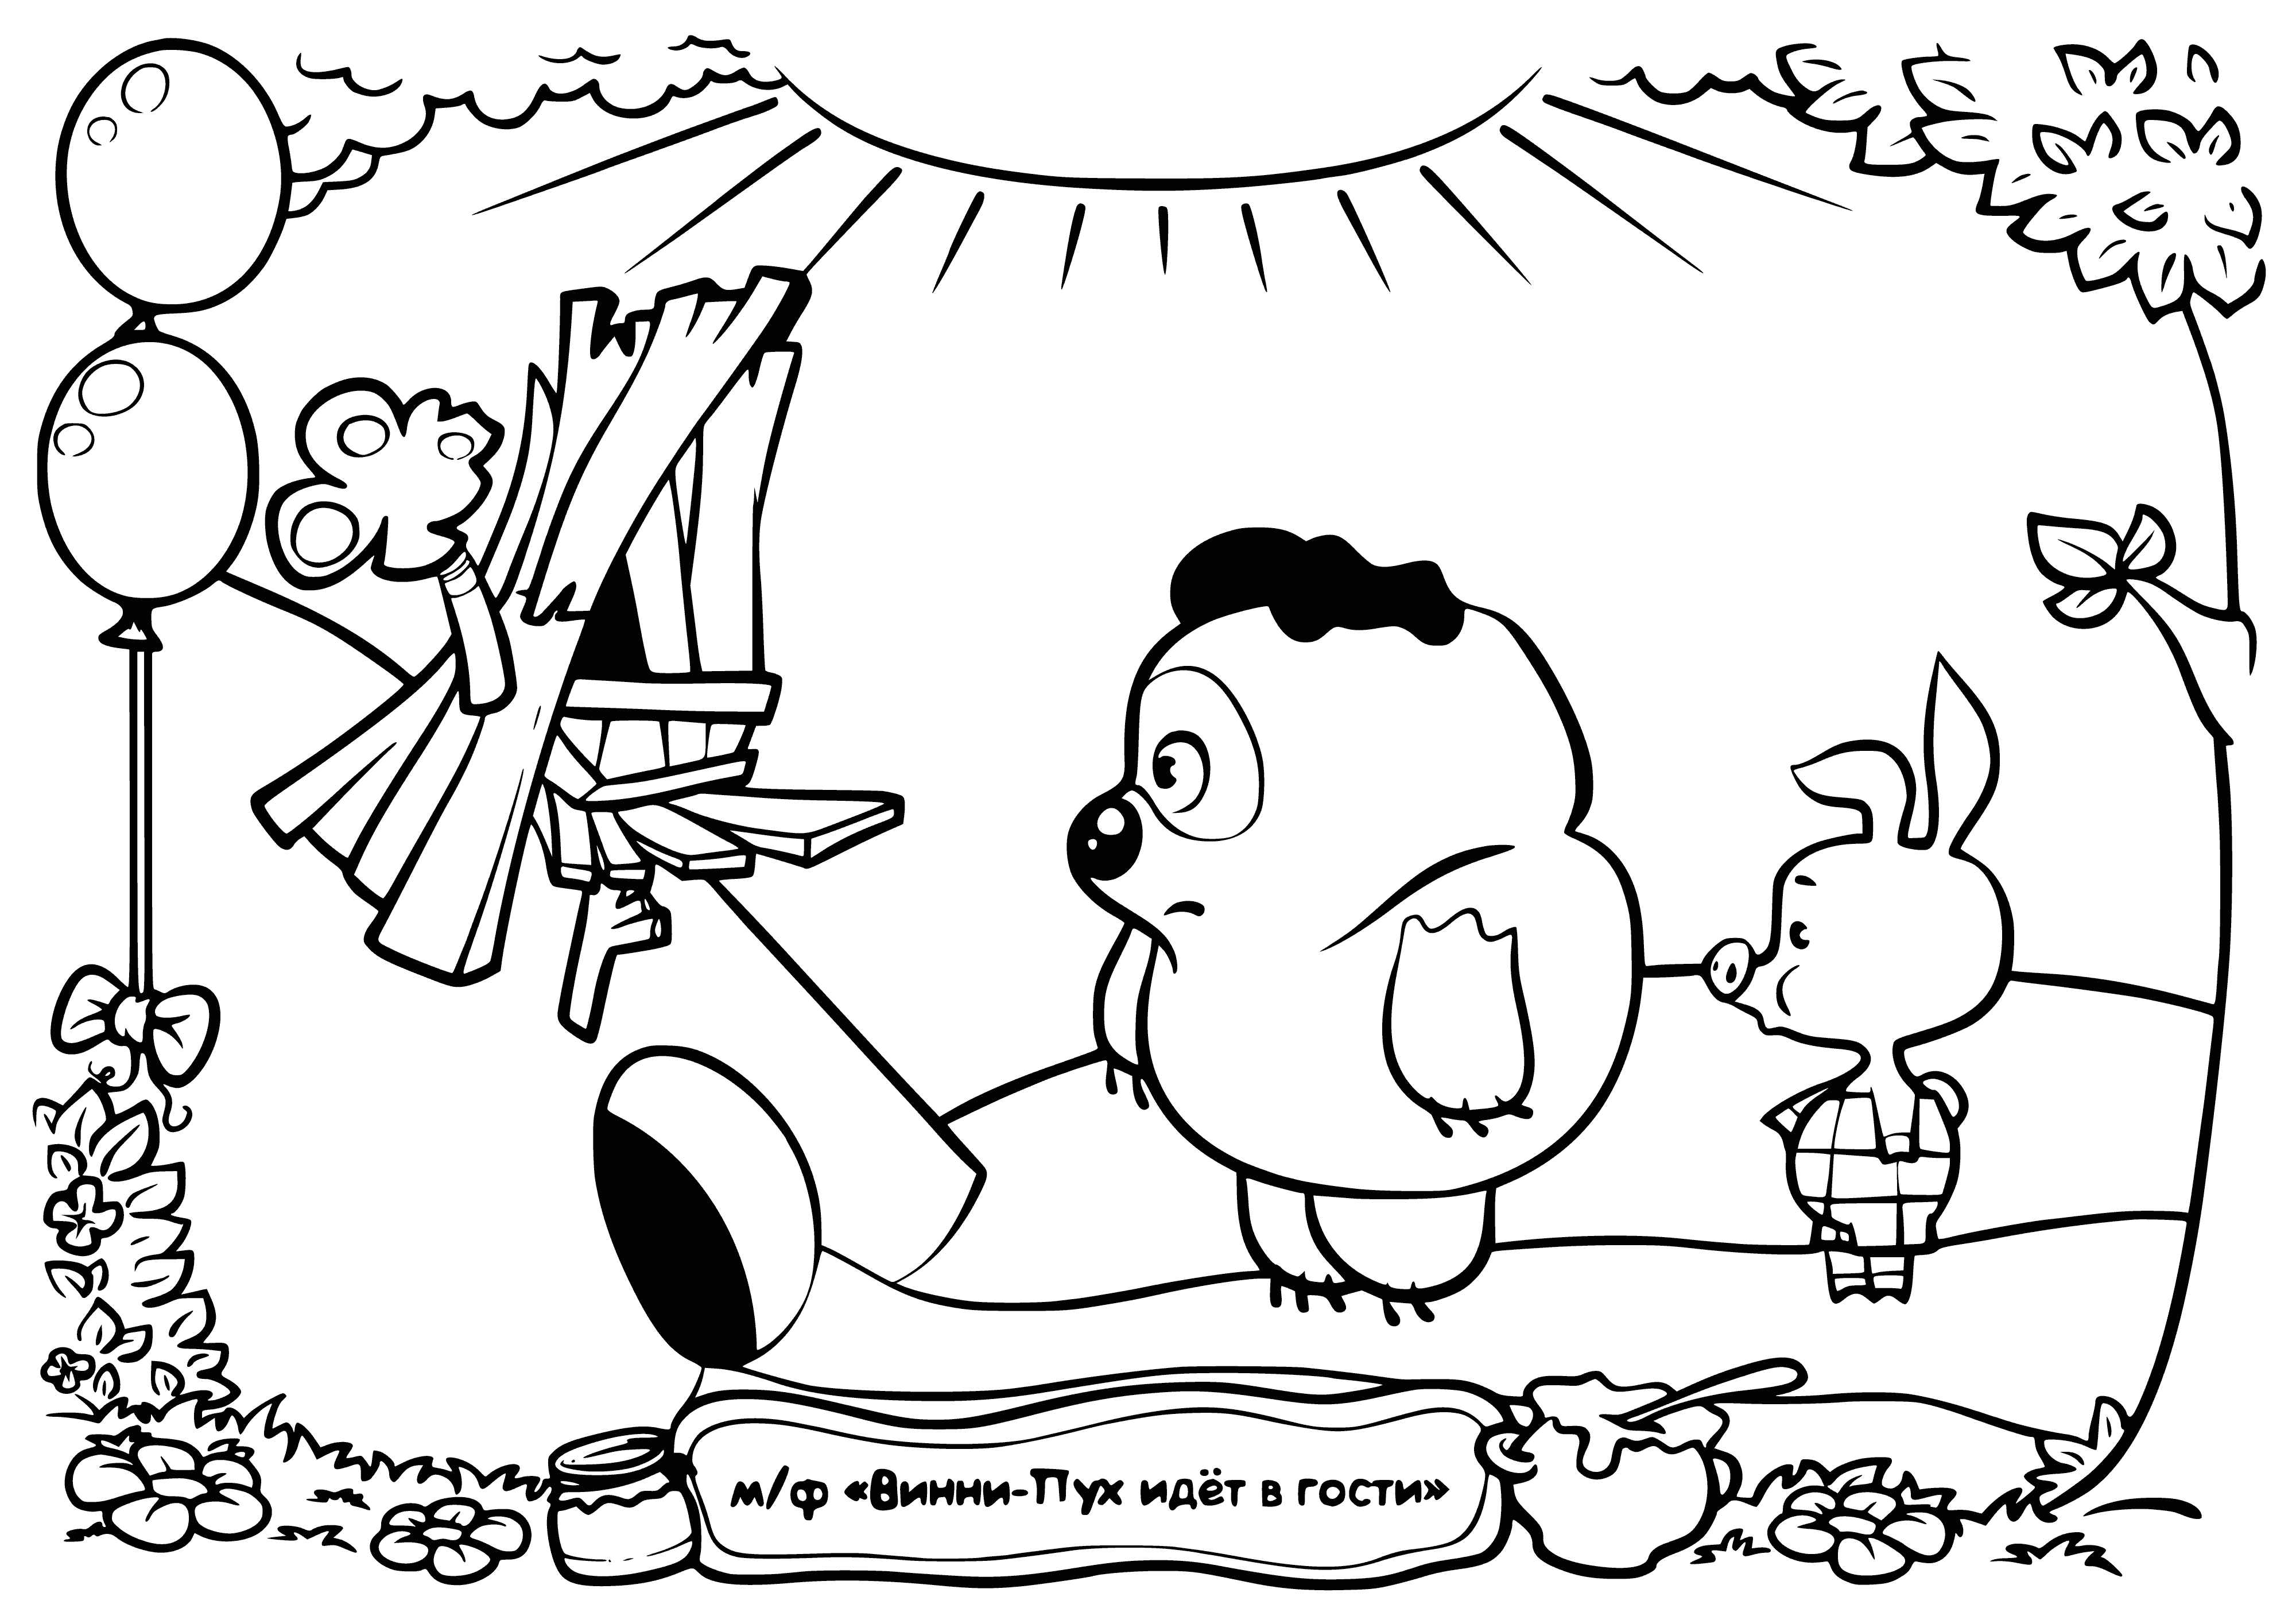 coloring page: Winnie the Pooh & Piglet at Rabbit's house sharing a convo by the fire with honey & a basket.